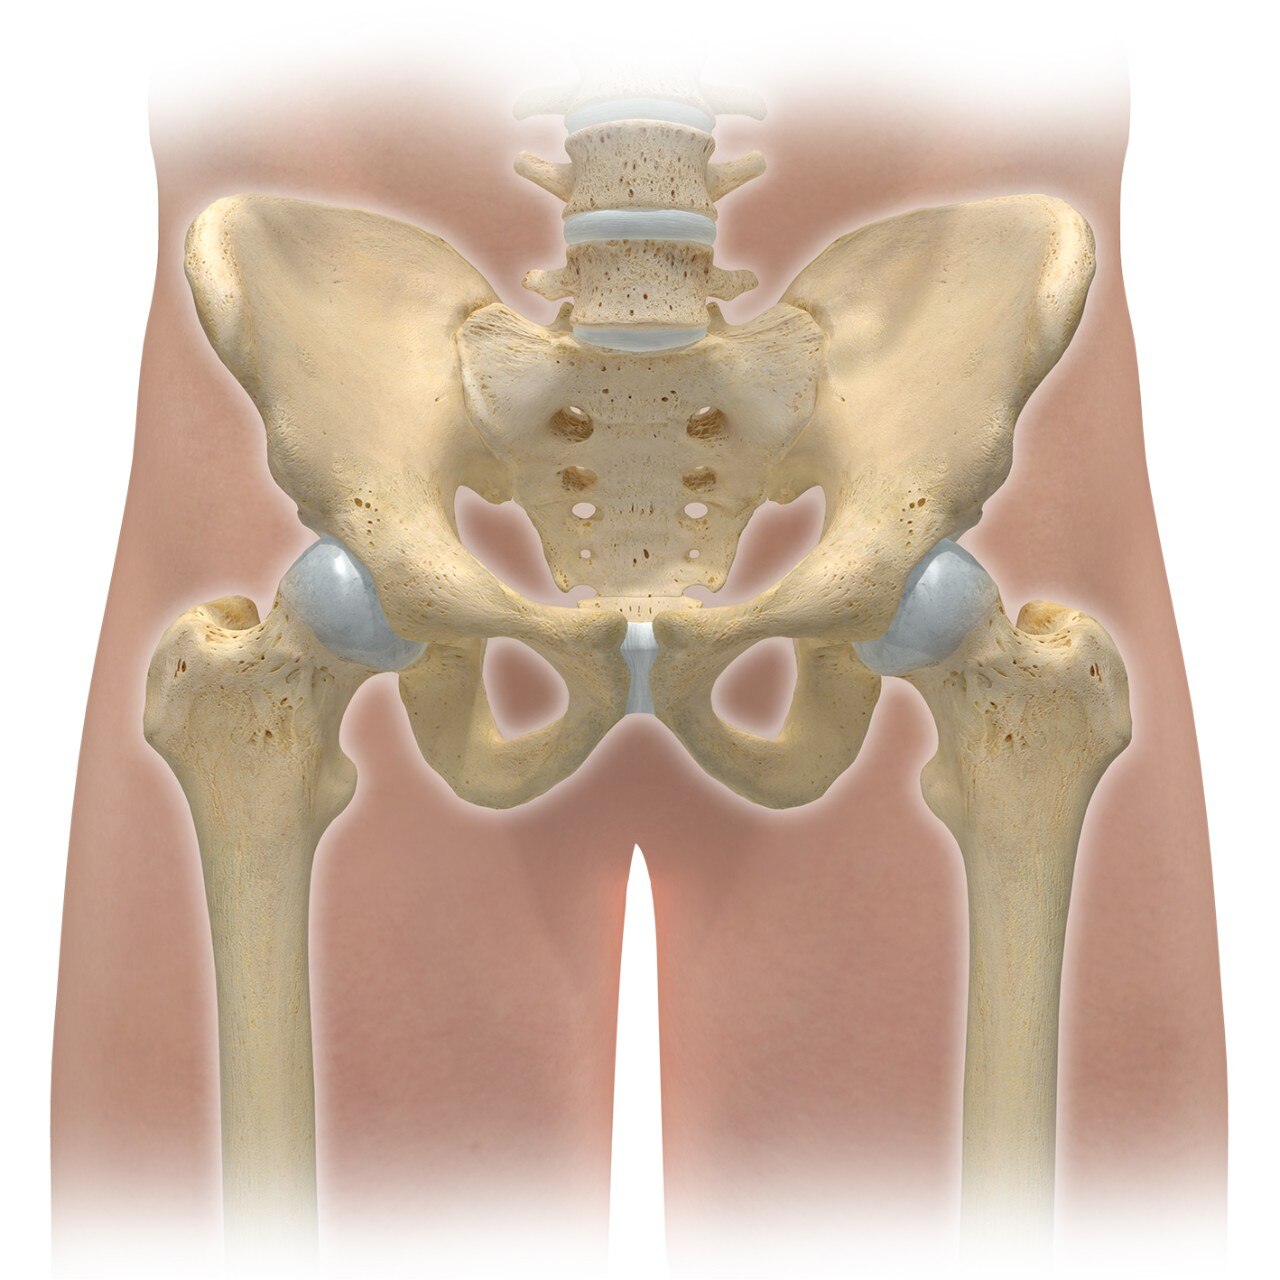 anterior hip - recovering from joint replacement surgery